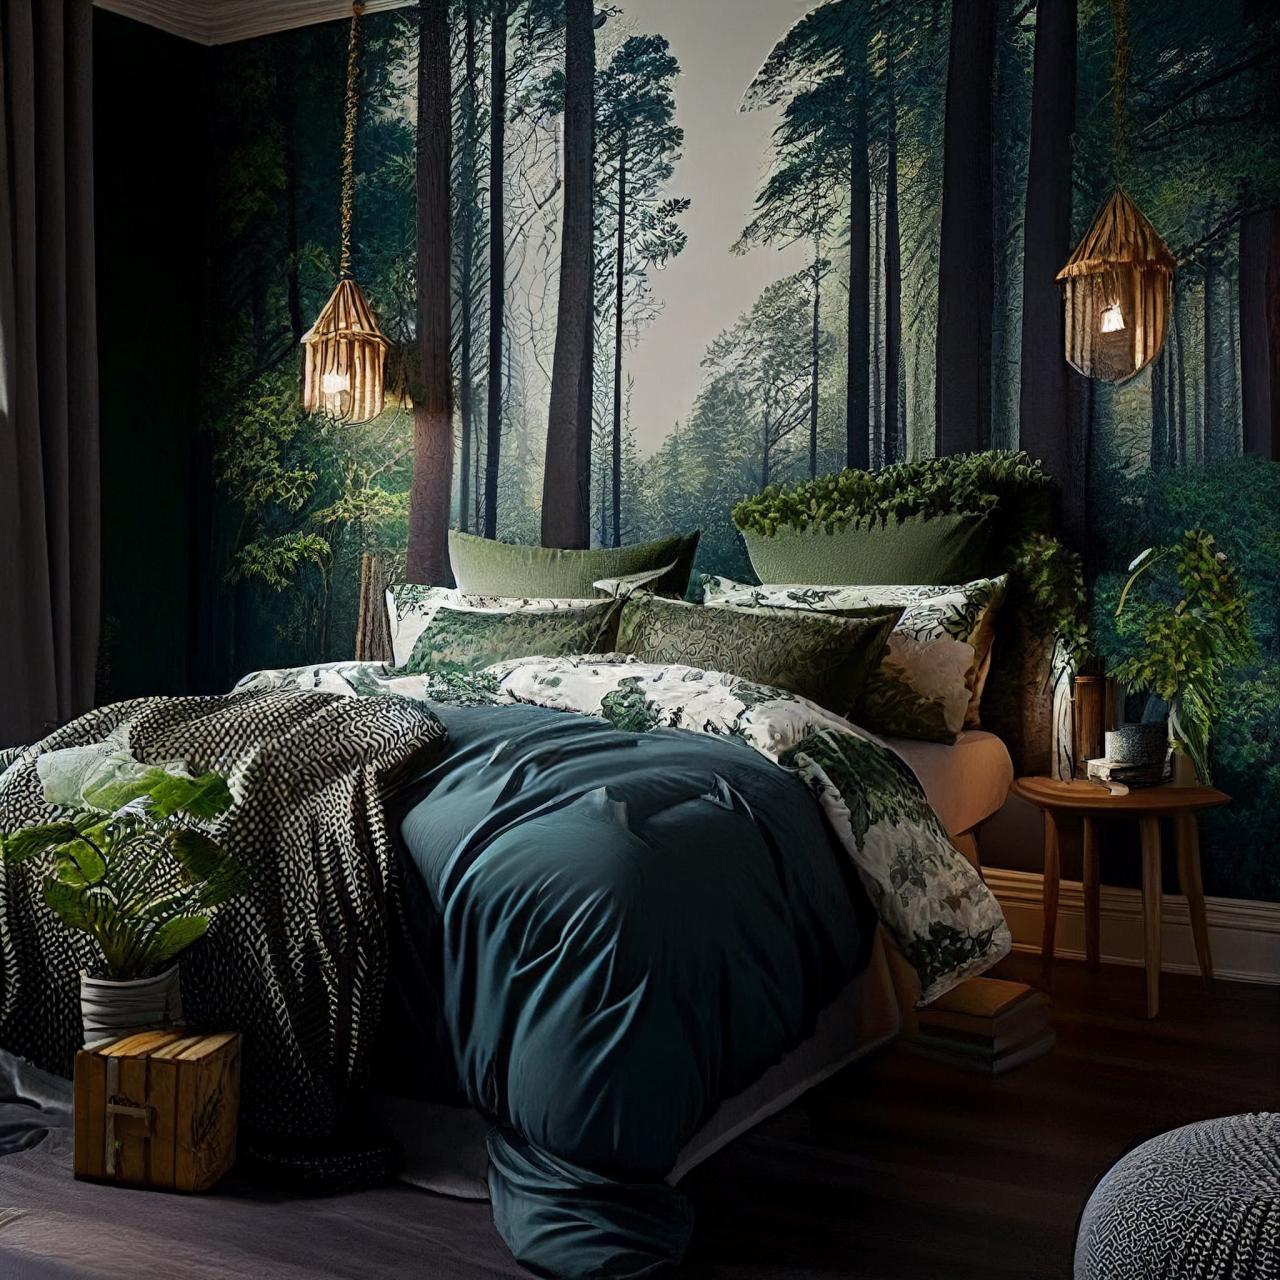 Outdoor-Inspired Bedroom Decor for Nature Lovers